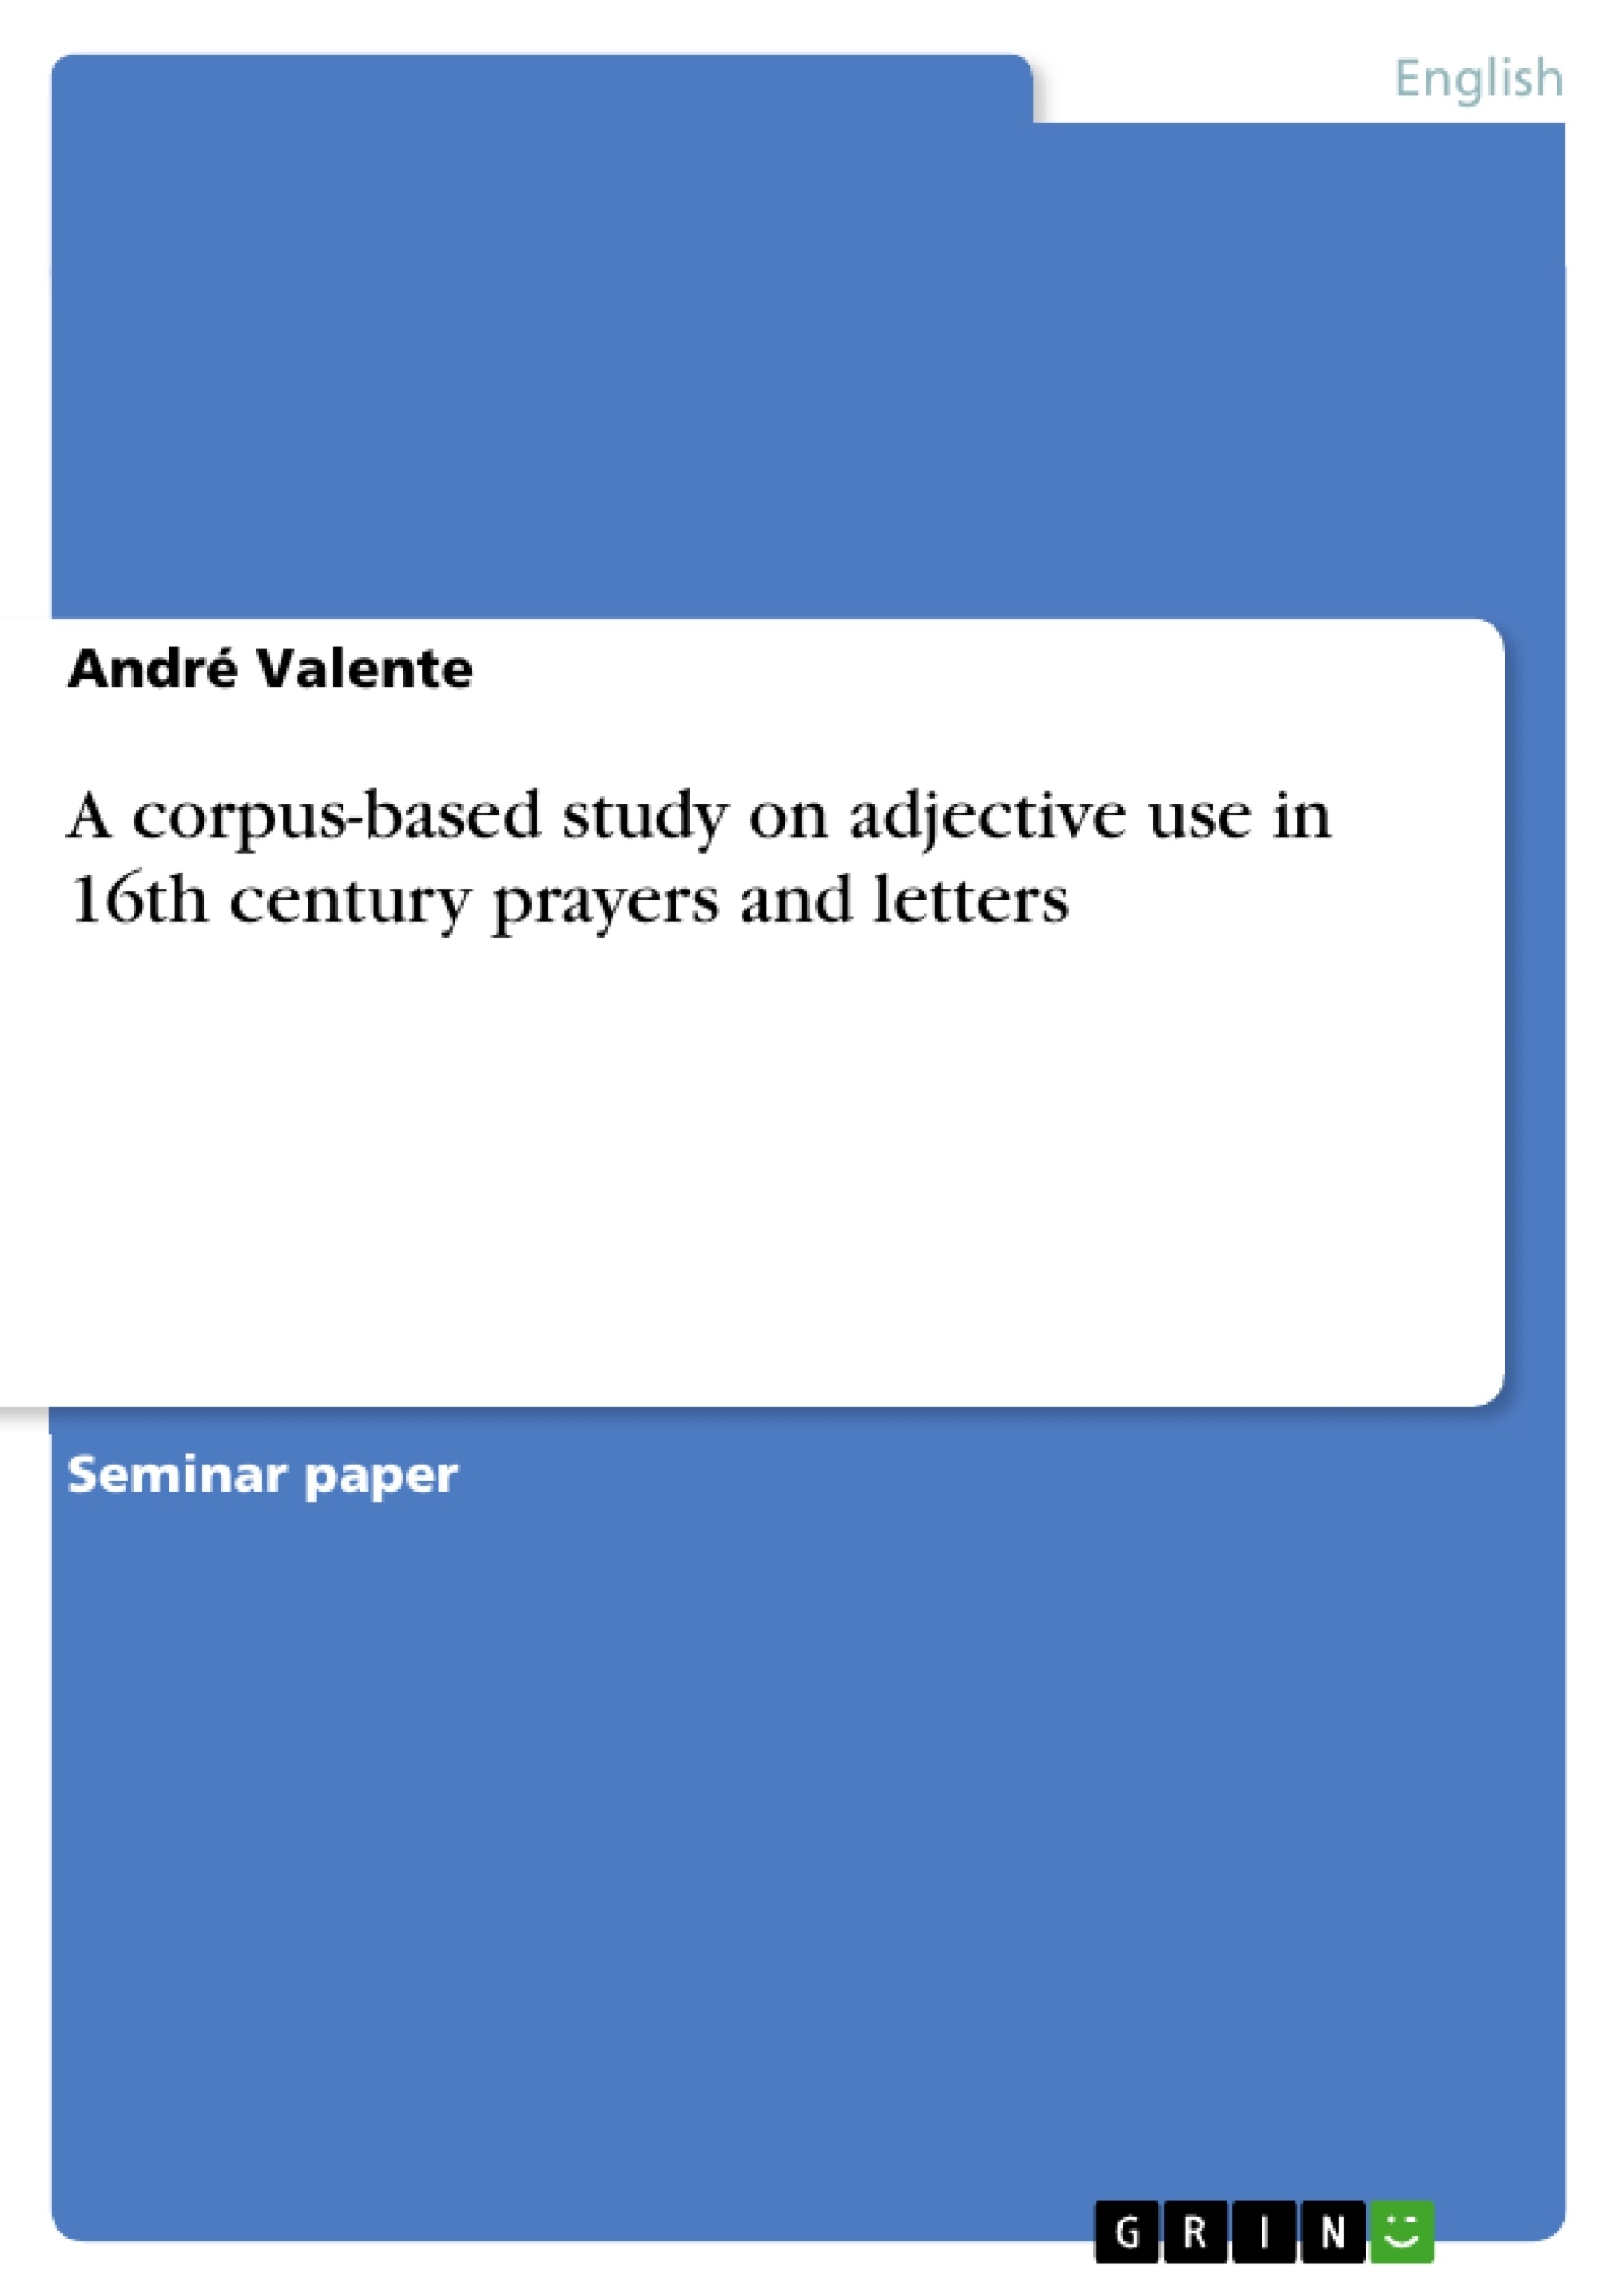 Title: A corpus-based study on adjective use in 16th century prayers and letters